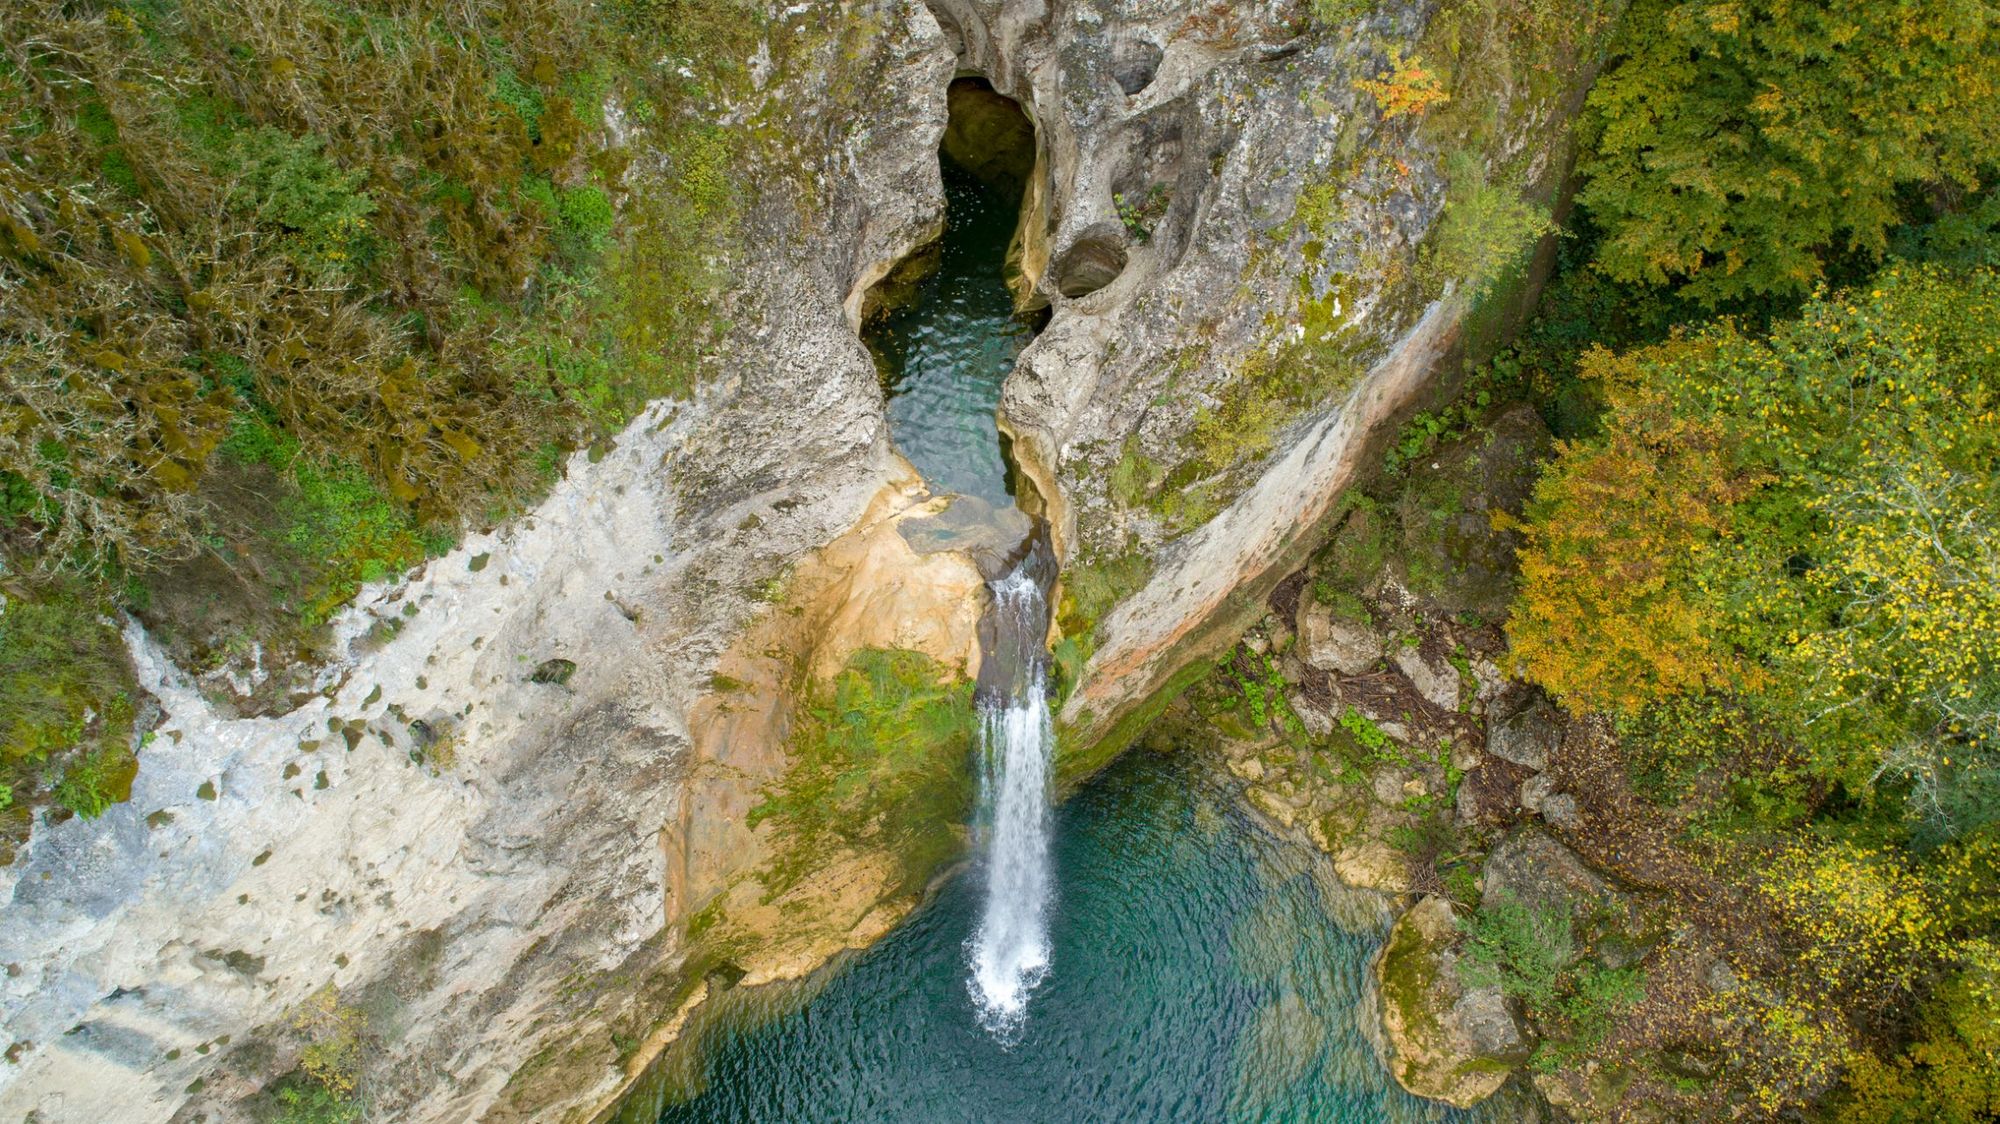 An aerial view of Ilıca Waterfall in Küre Mountains National Park, Turkey